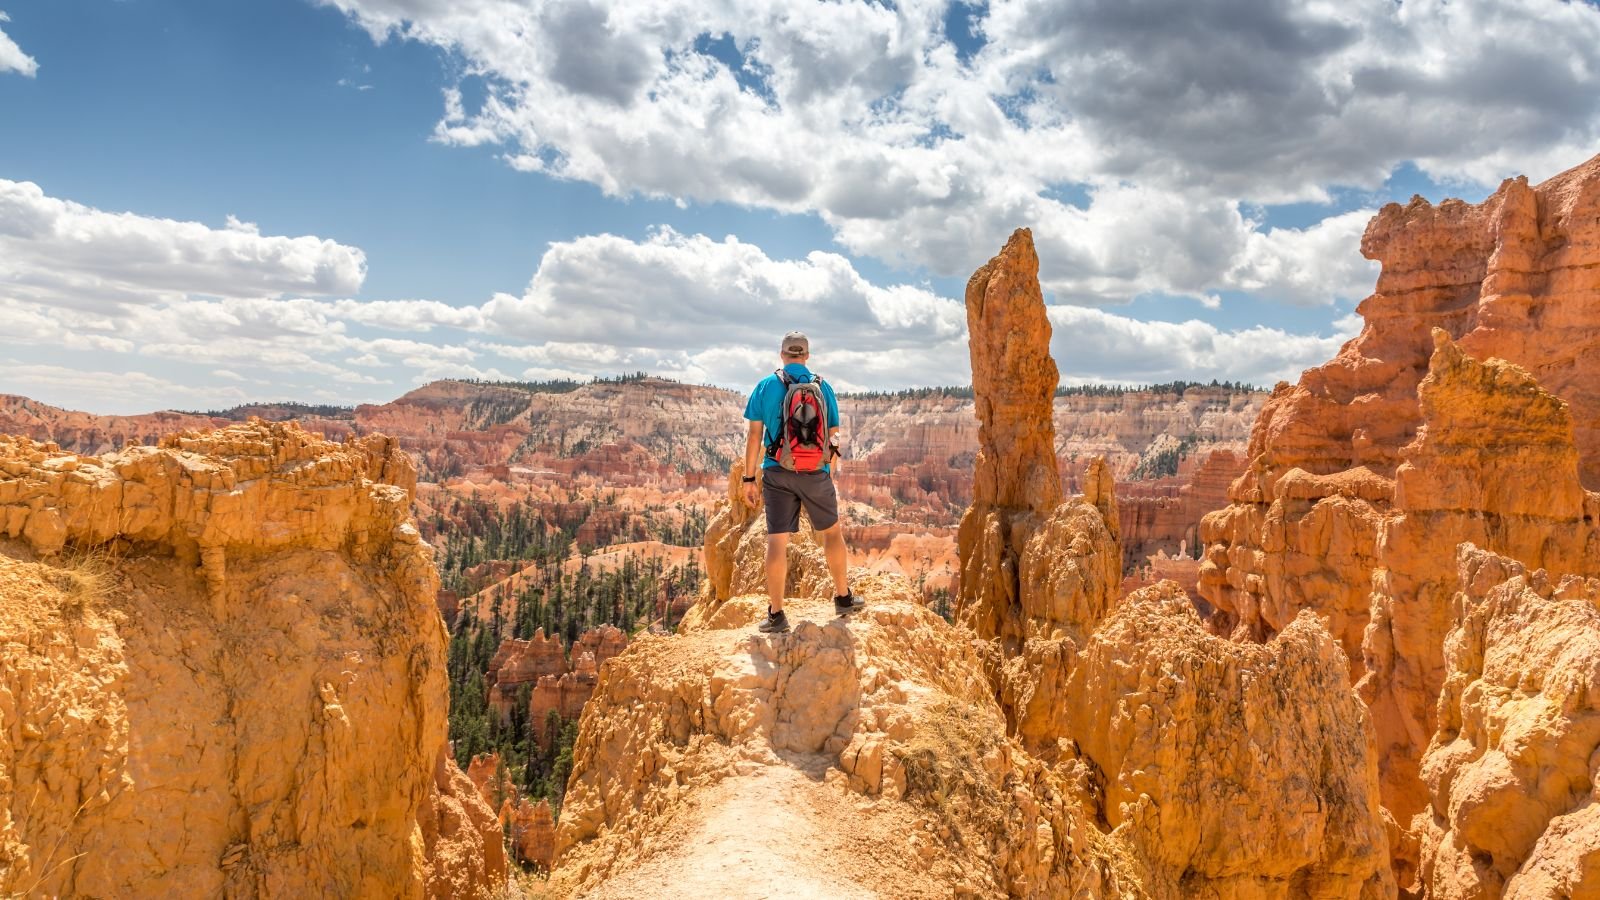 <p>Bryce Canyon National Park is famous for its thousands of red rock hoodoos set against pine forests and blue skies. The park awes seniors with its natural grandeur. The high elevation provides pleasant summers for hiking and exploring this geologic wonder.</p>